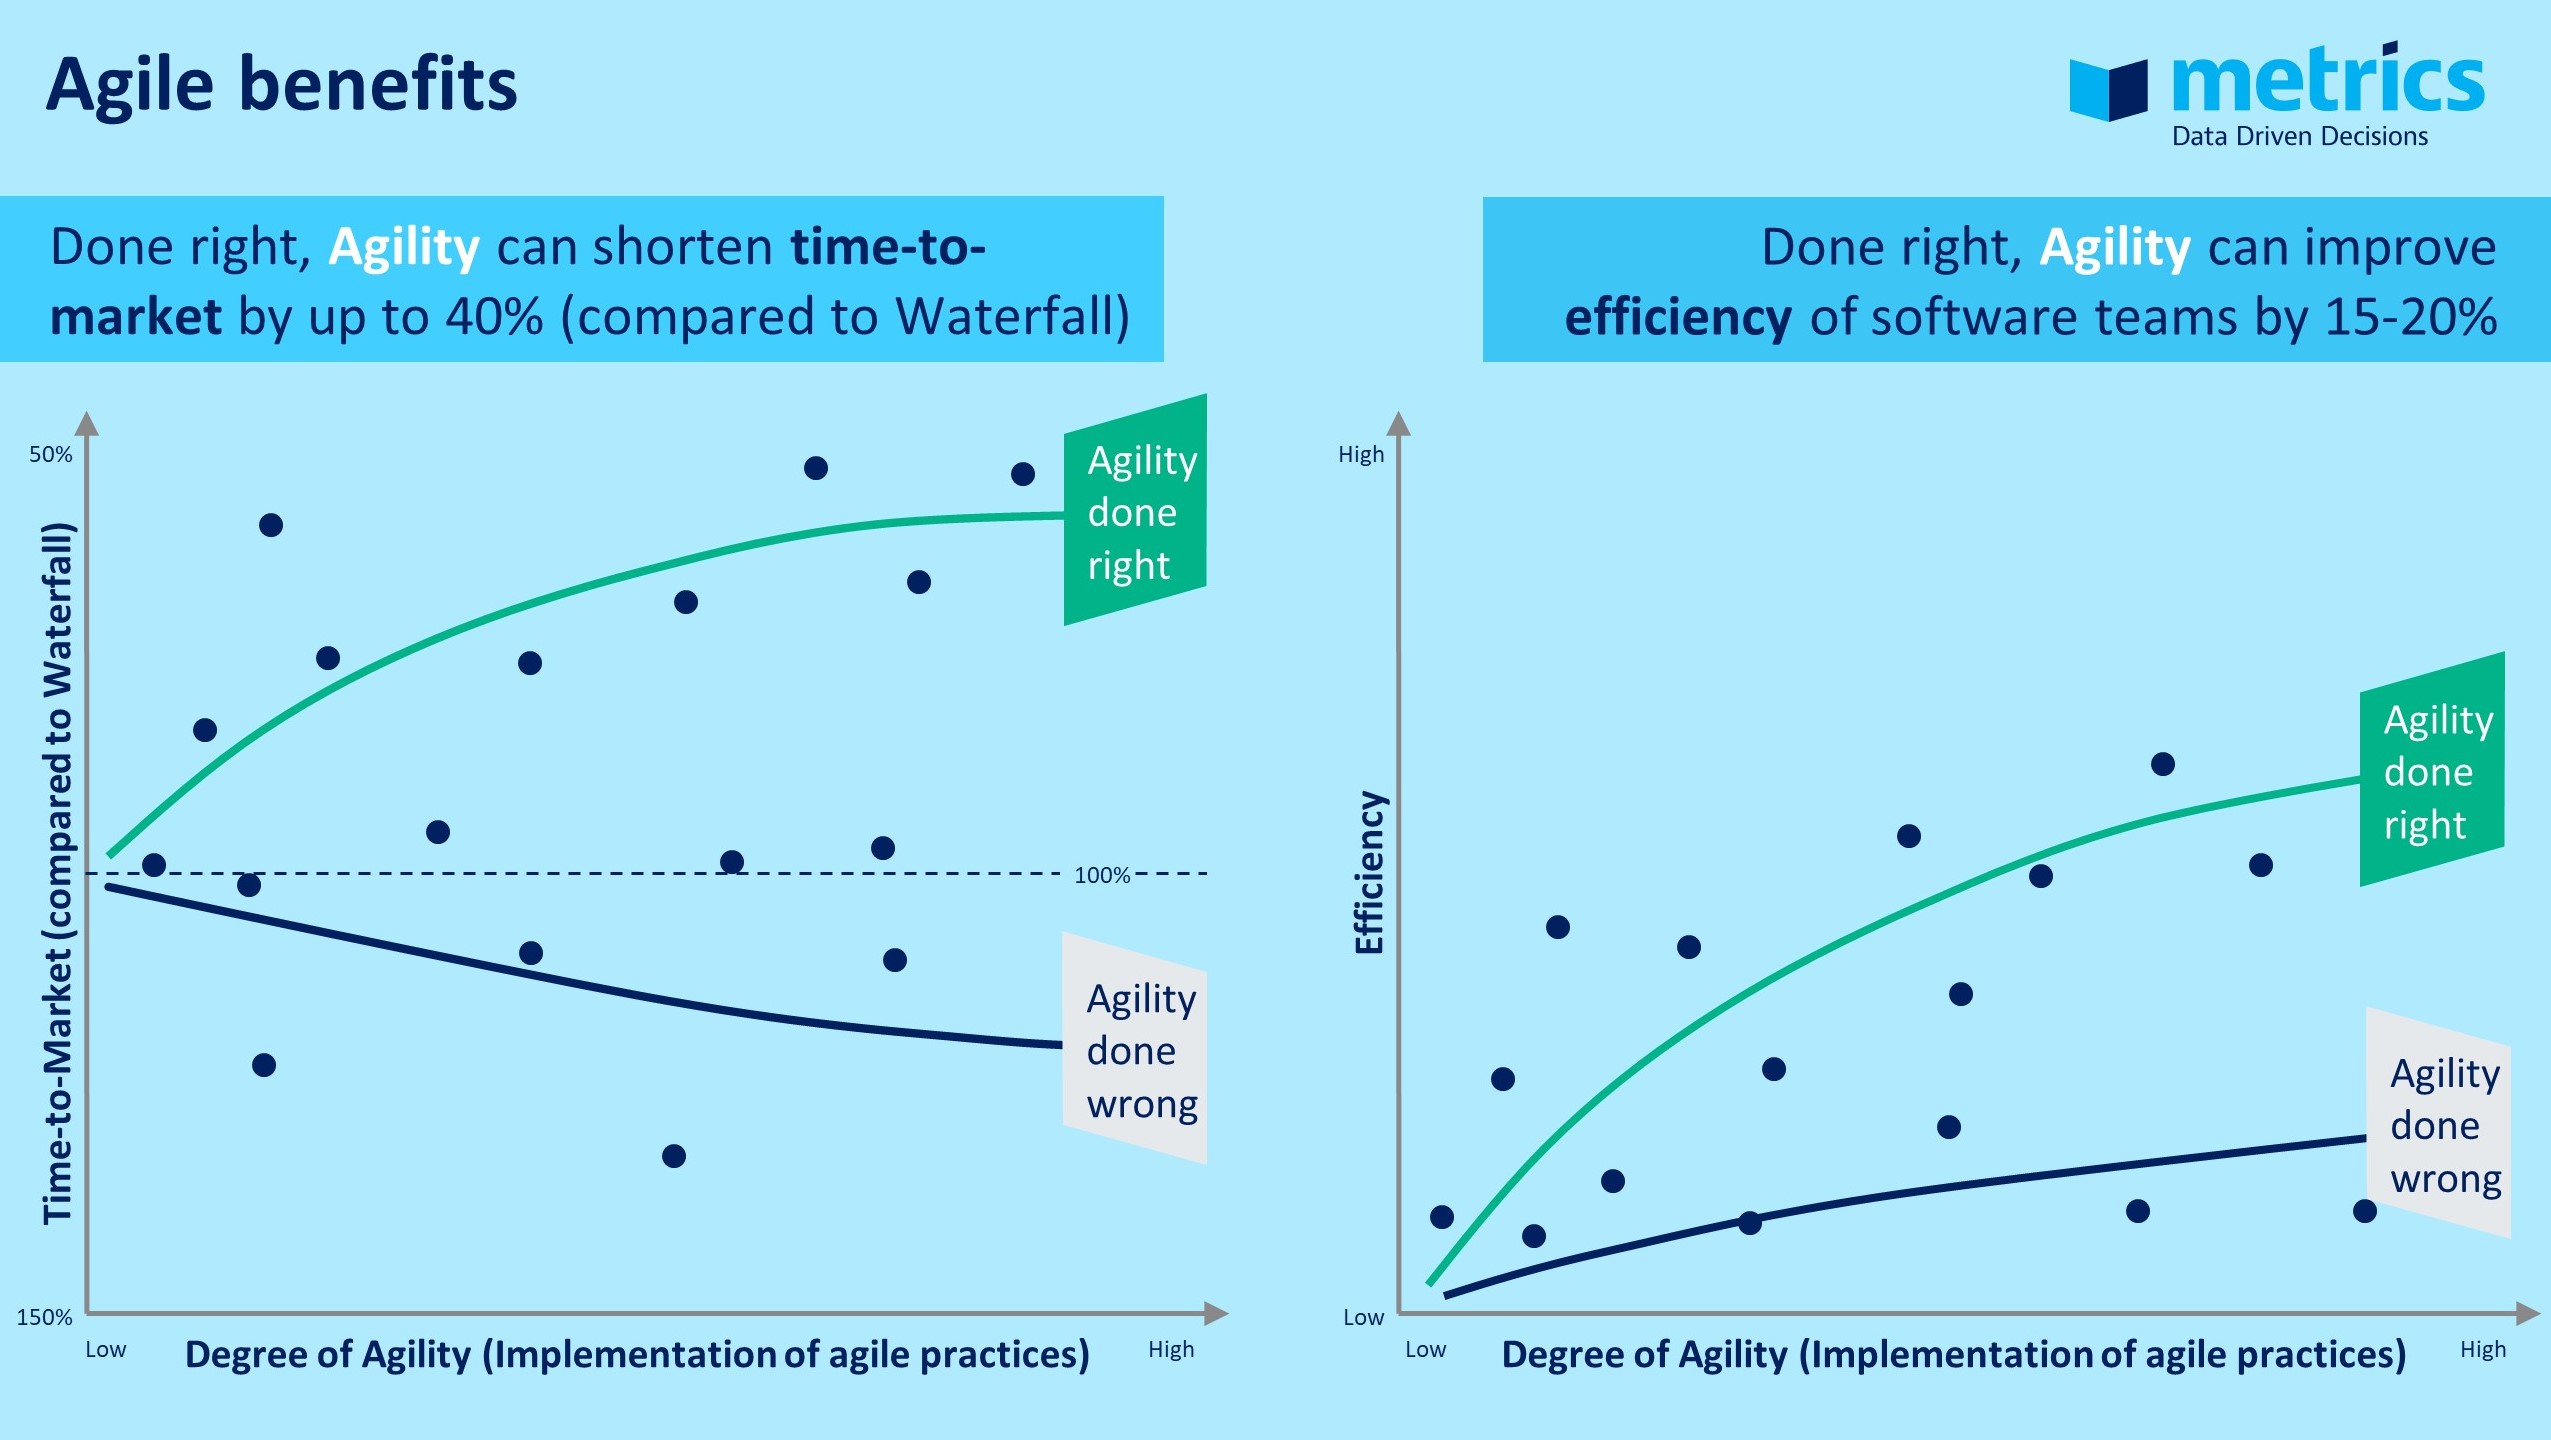 Efficiency and time-to-market can improve when Agile is done right